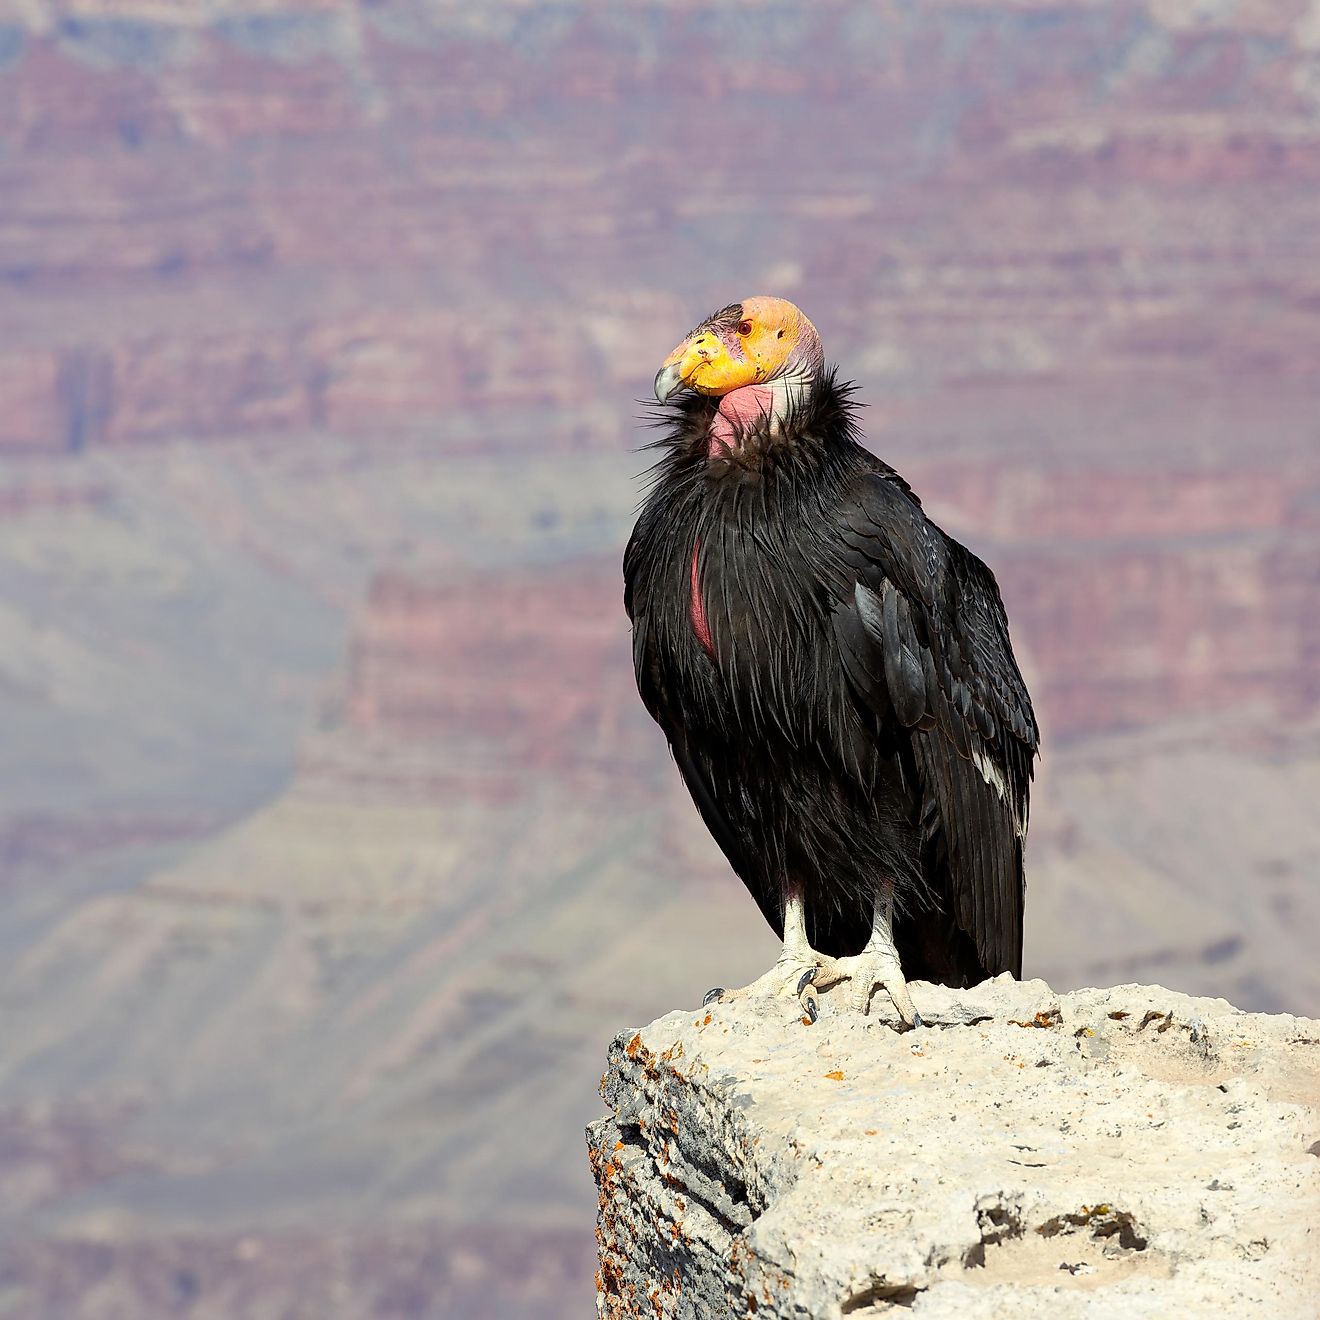 With only several hundred living in the wild today, the critically endangered California Condor lists among the world's rarest birds.